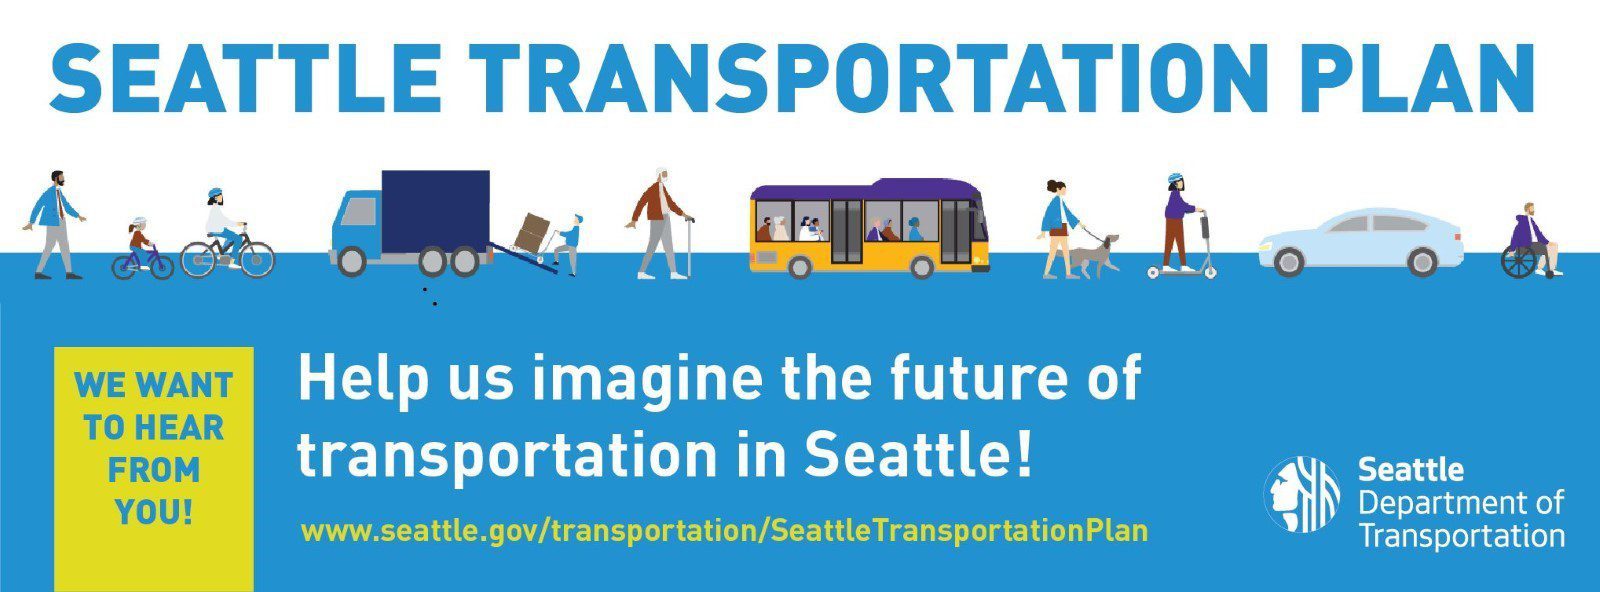 Blue and white graphic with animated people walking, rolling, driving, and taking transit. Text: Seattle Transportation Plan. Help us imagine the future of the transportation in Seattle! 